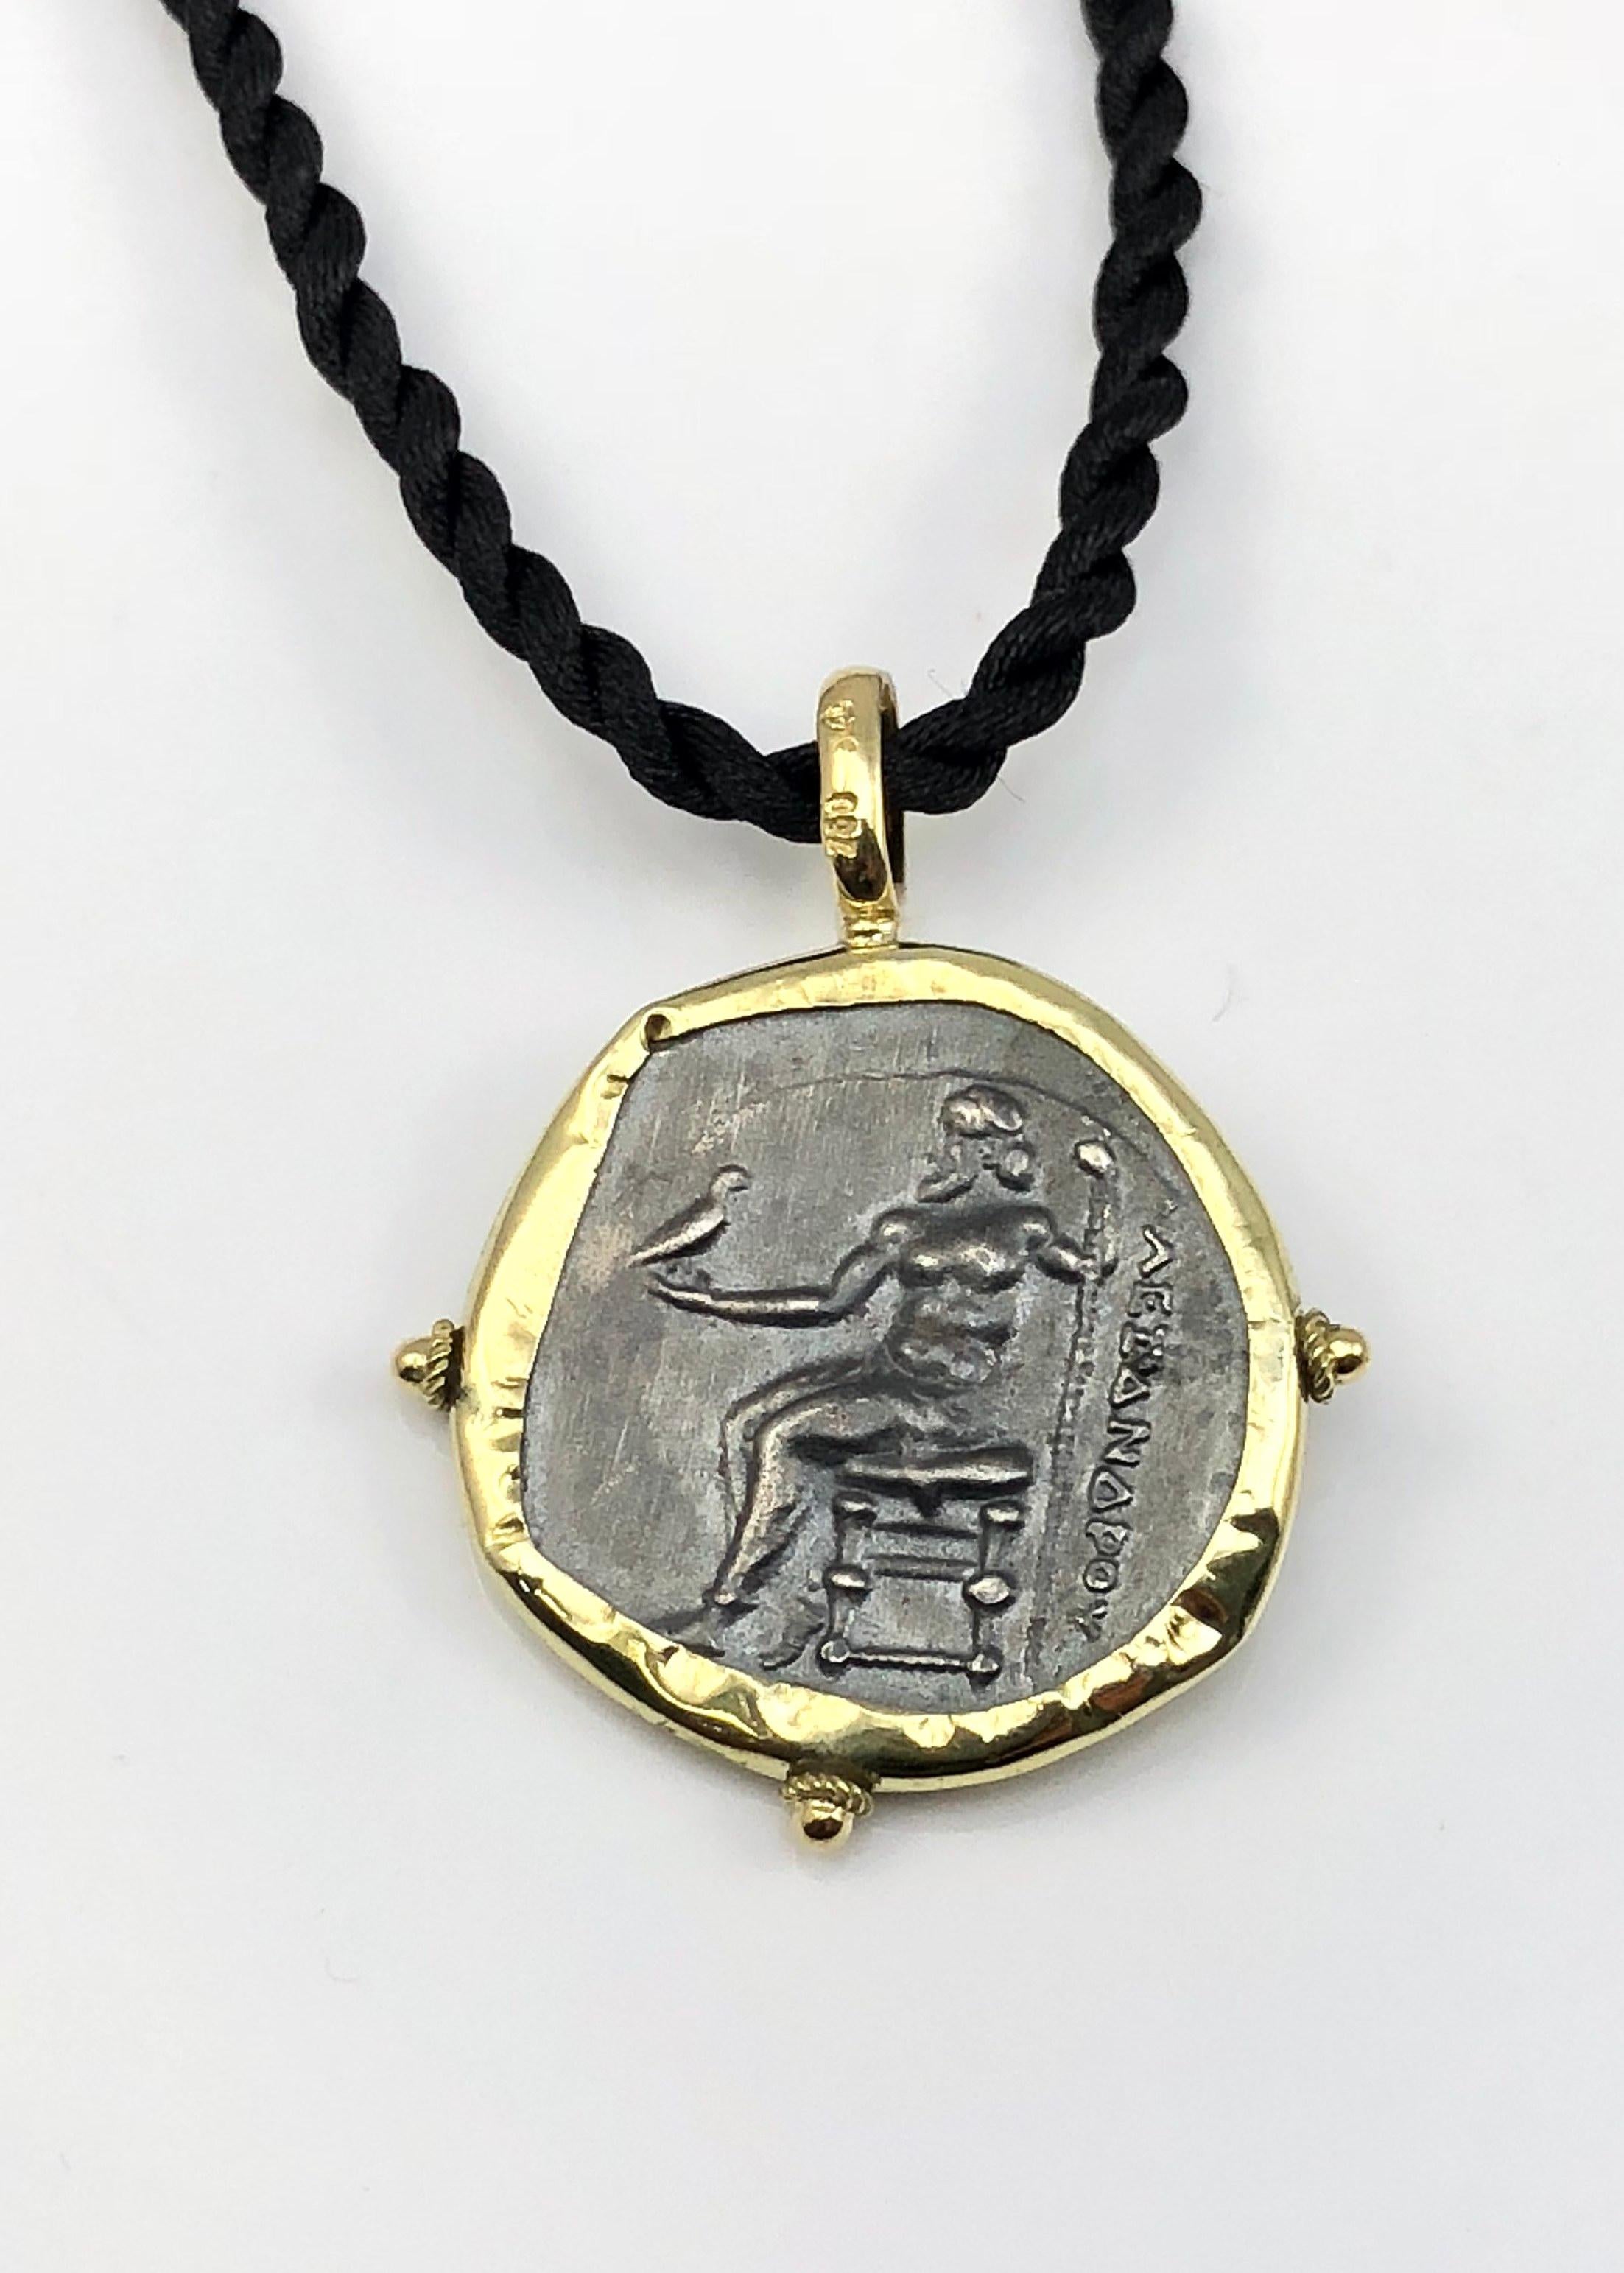 S.Georgios designer 18 Karat Yellow Gold handmade Pendant Necklace featuring a replica of an Ancient Greek Hercules Coin in Silver 925. The coin has a beautiful reverse side and can be worn both ways, and has granulation work in Byzantine style in